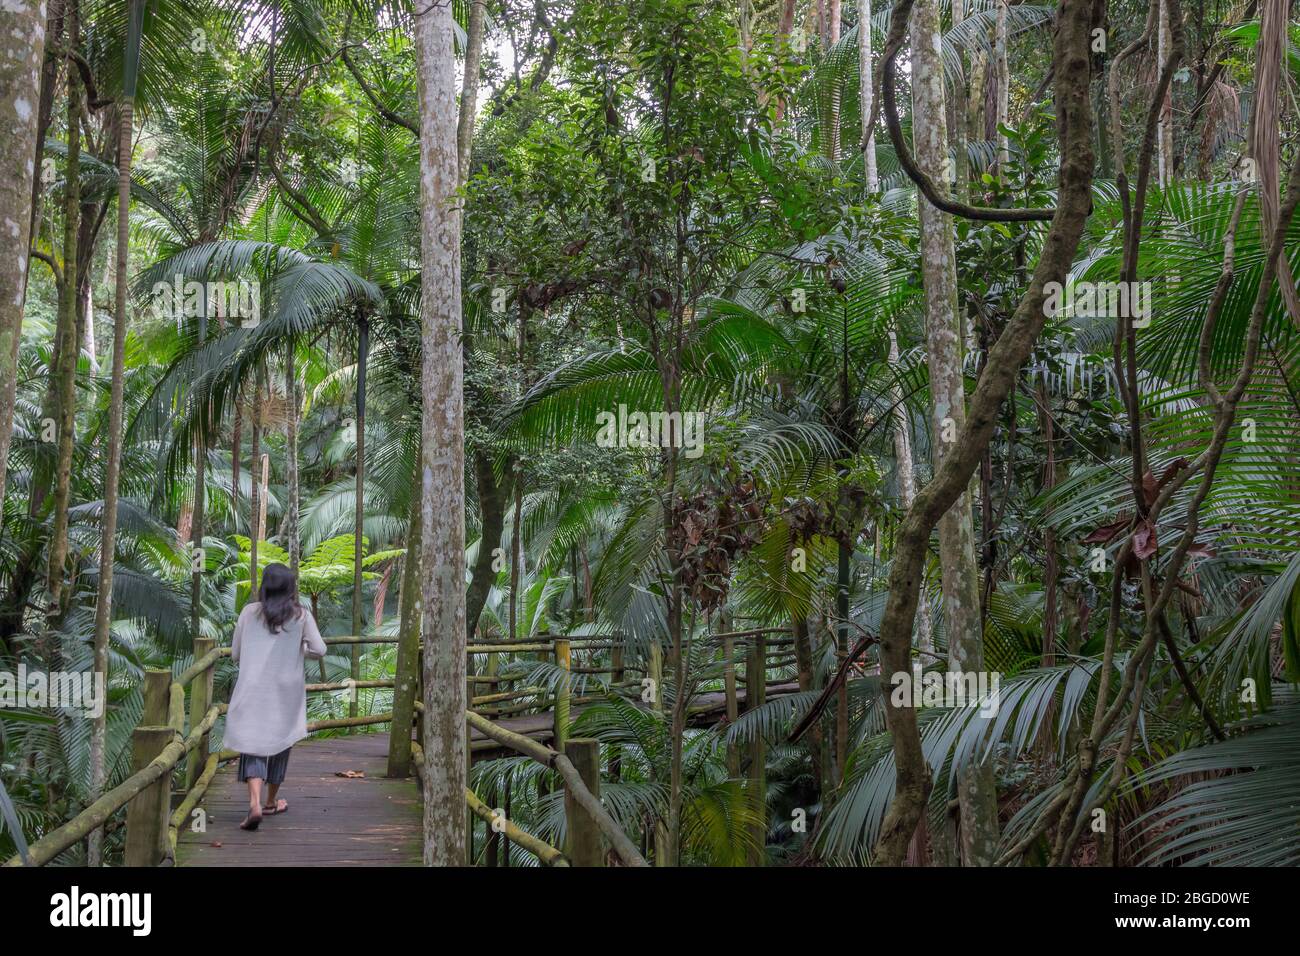 Female tourist wanders peacefully through tropical botanic gardens in Sao Paulo, Brazil, surrounded by a forest of tall trees Stock Photo